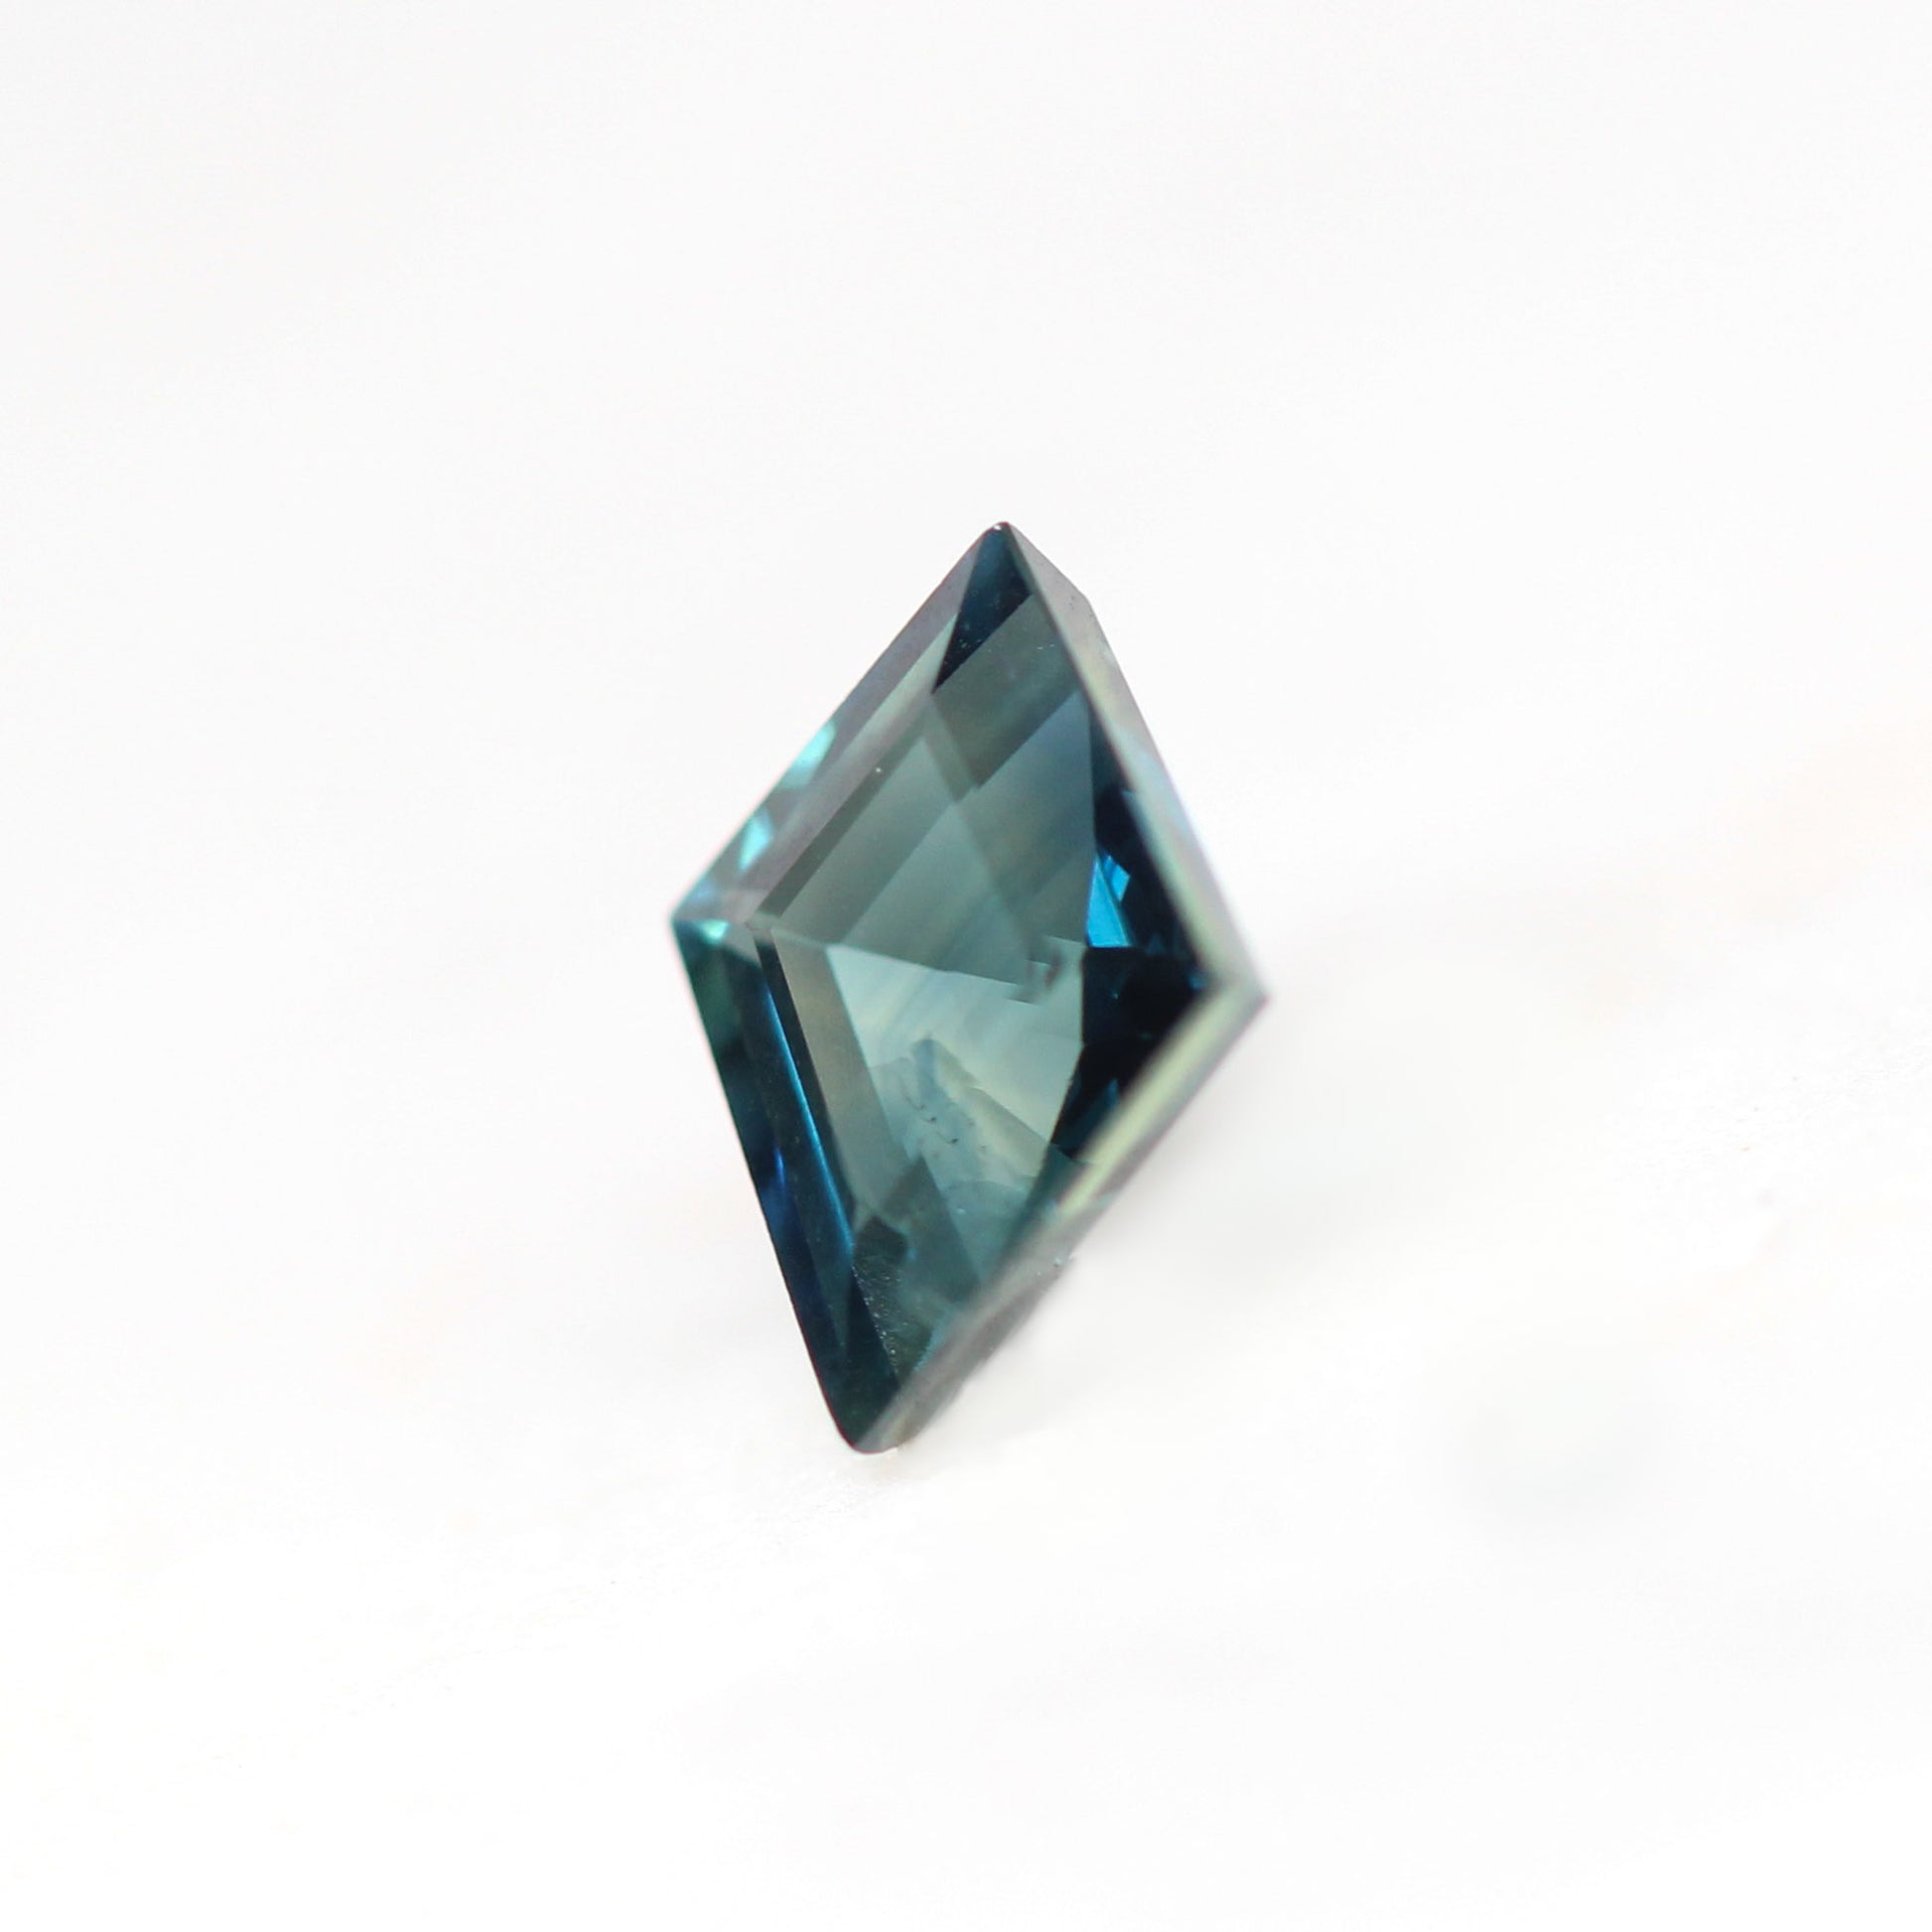 1.74 Carat Kite Blue Sapphire for Custom Work - Inventory Code KBS174 - Midwinter Co. Alternative Bridal Rings and Modern Fine Jewelry